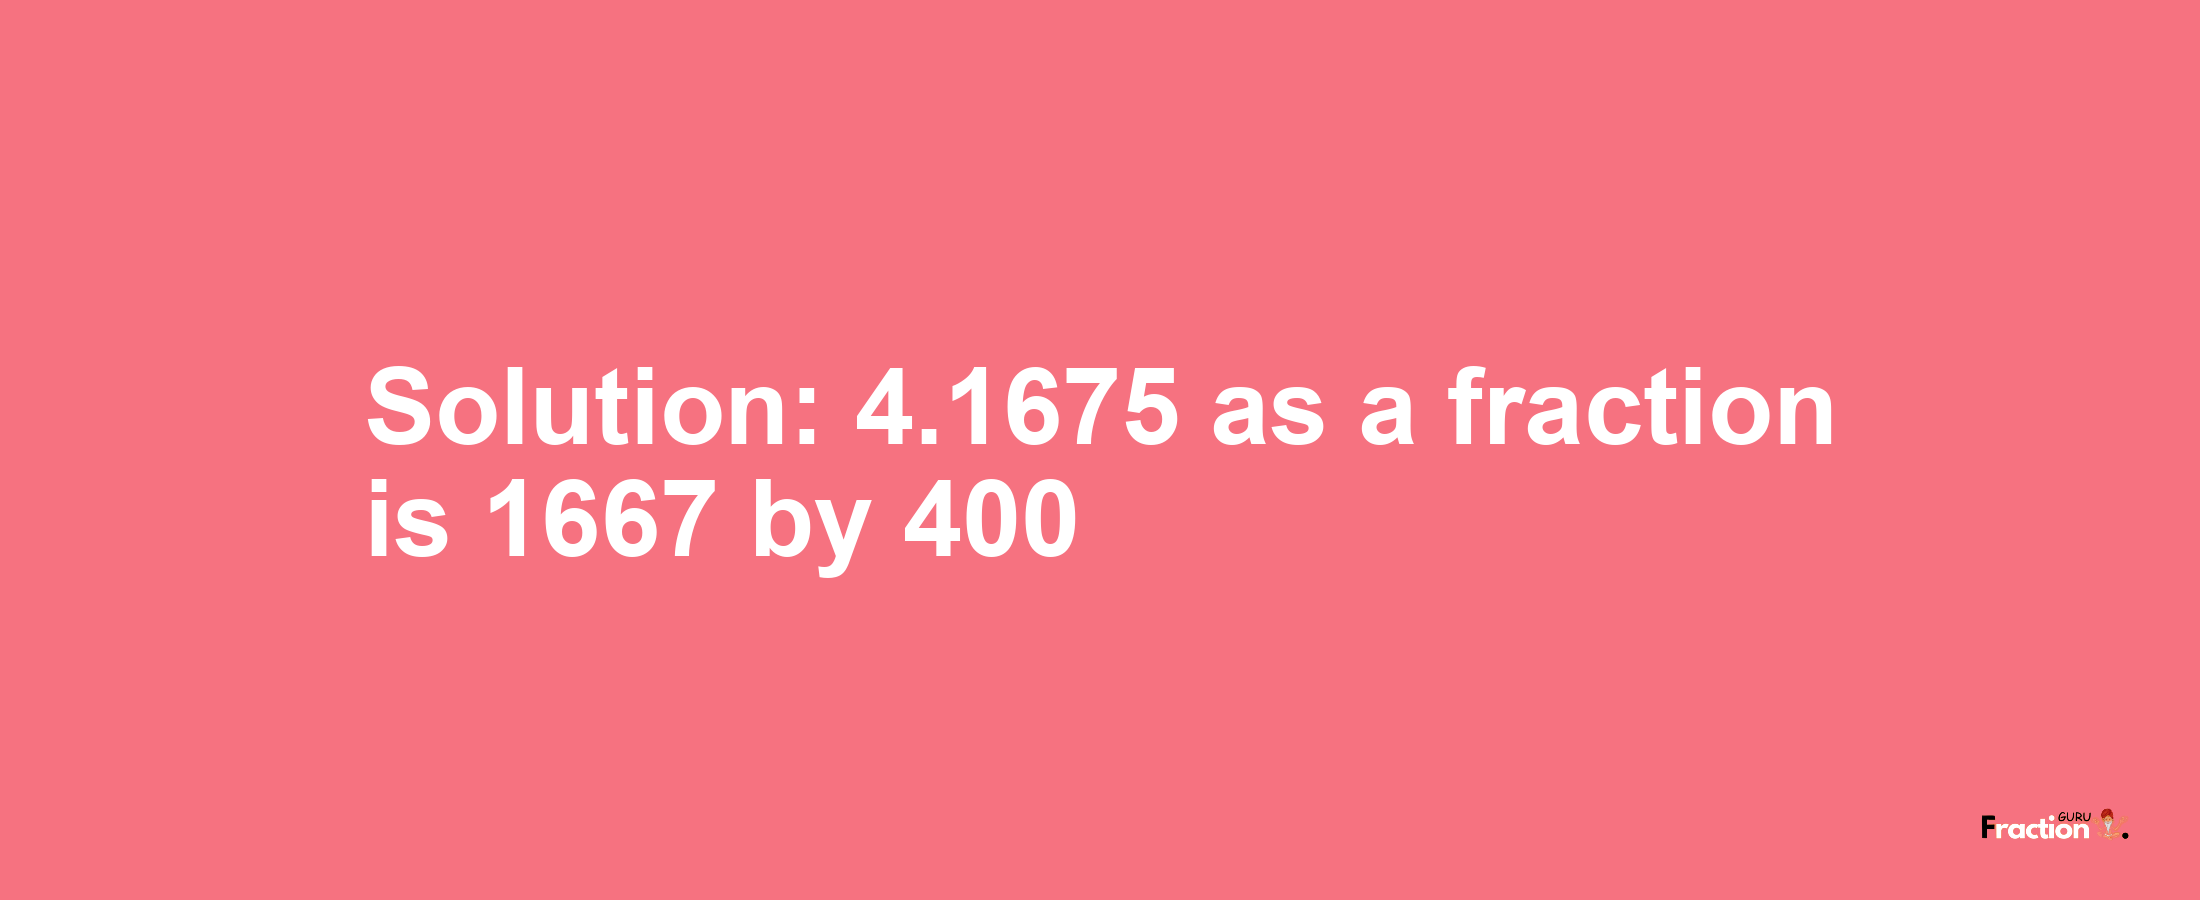 Solution:4.1675 as a fraction is 1667/400